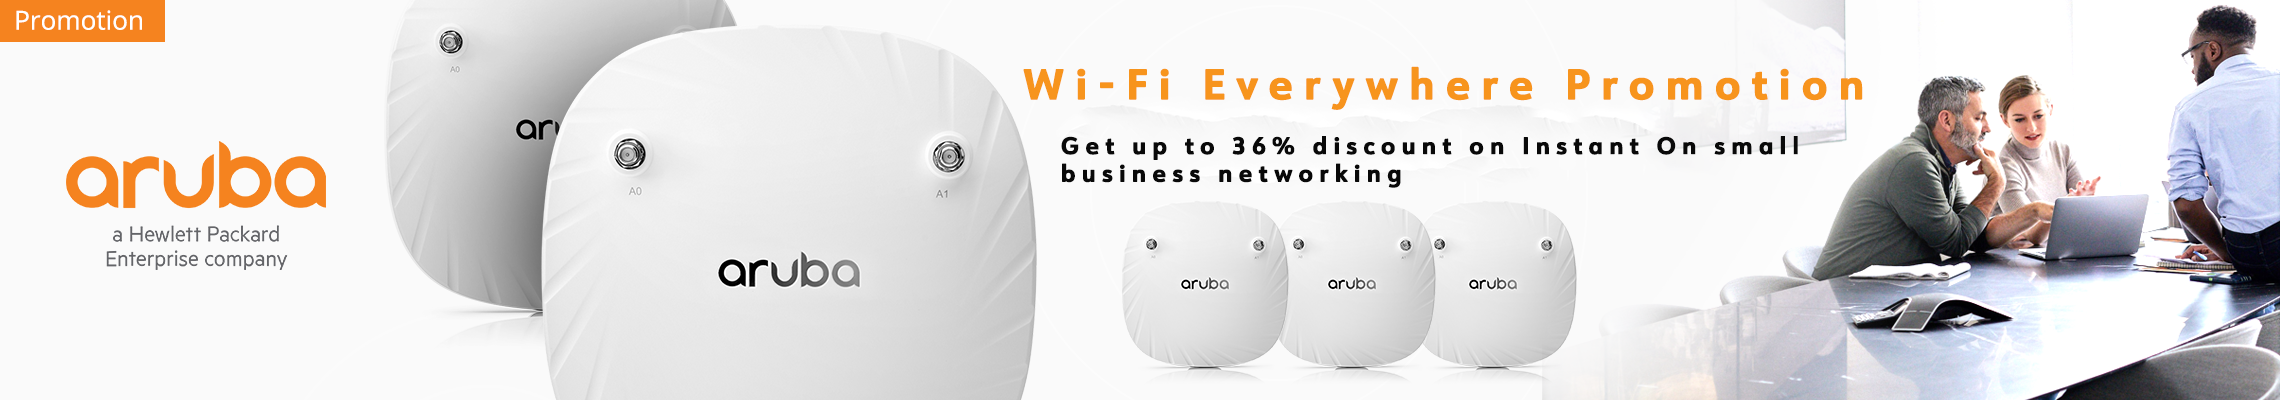 Wi-Fi Everywhere Promotion banner